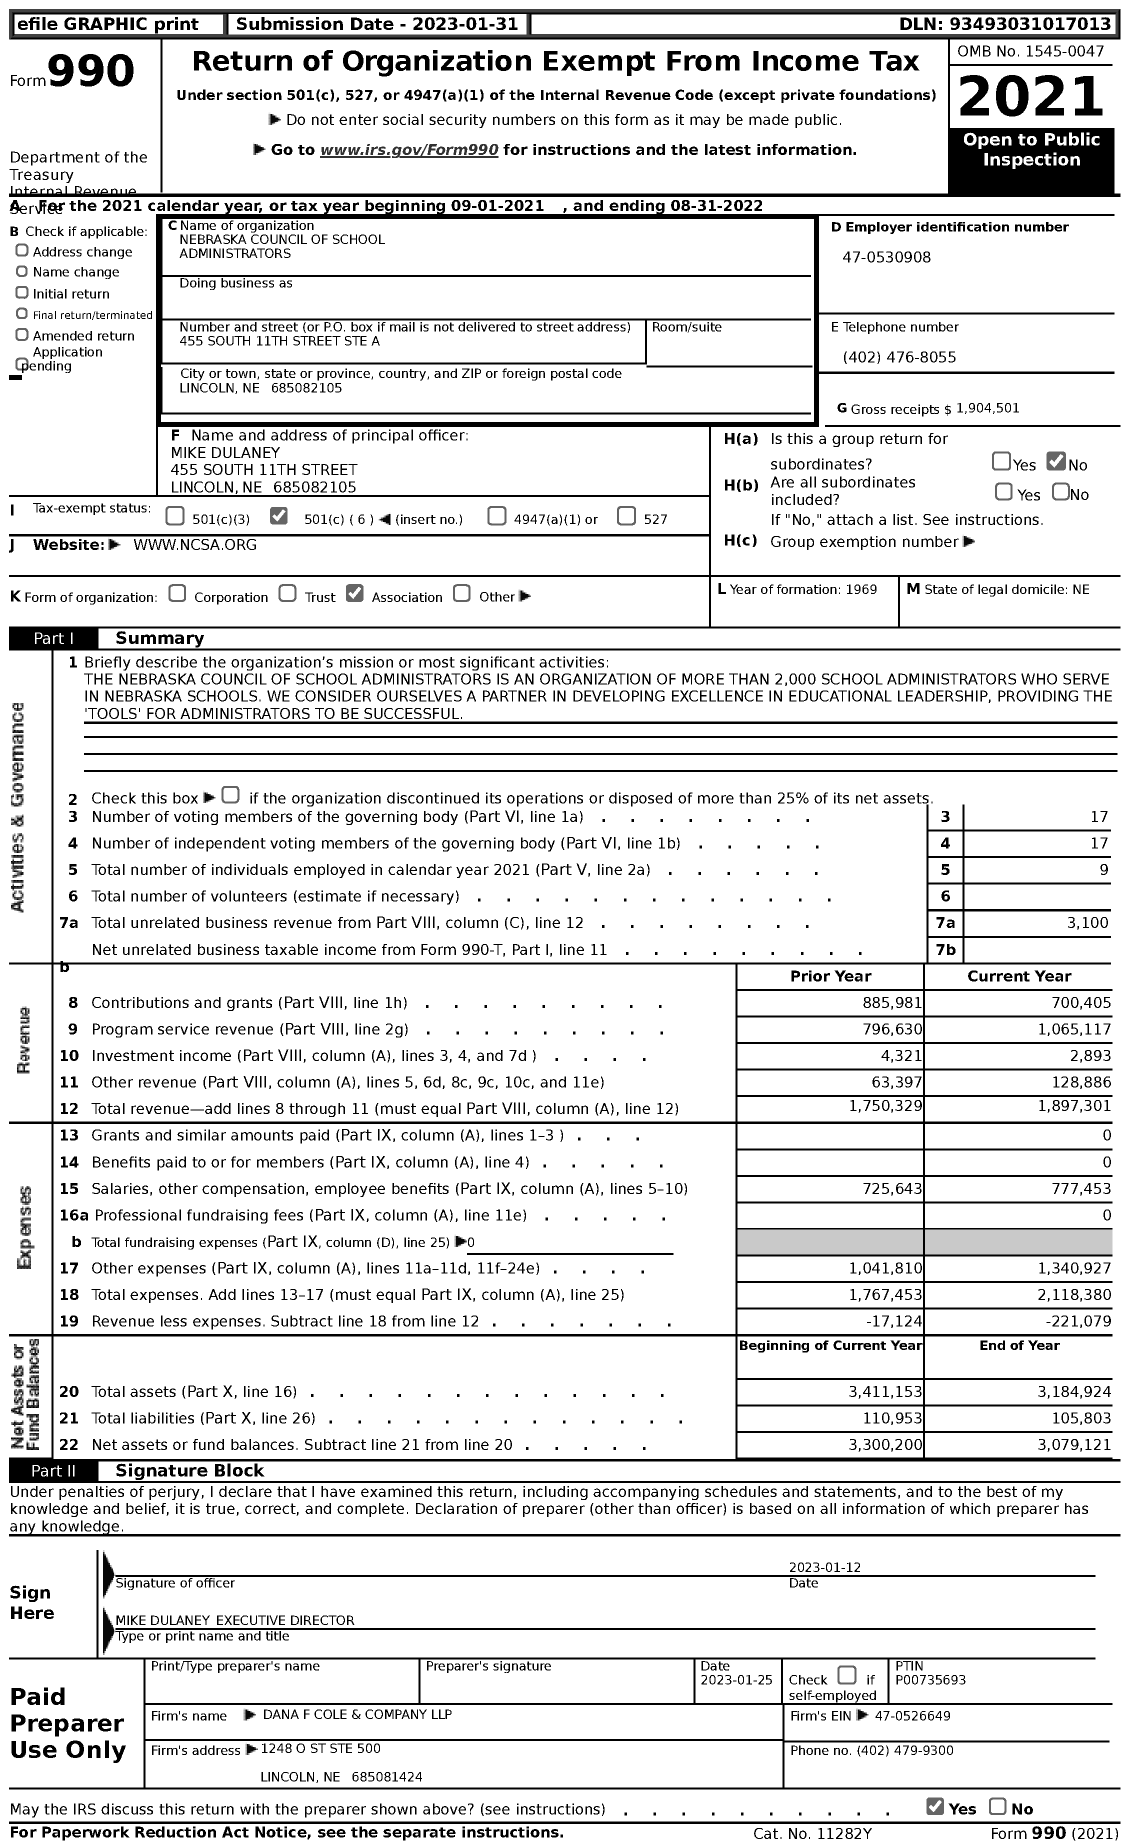 Image of first page of 2021 Form 990 for Nebraska Council of School ADMINISTRATORS (NCSA)